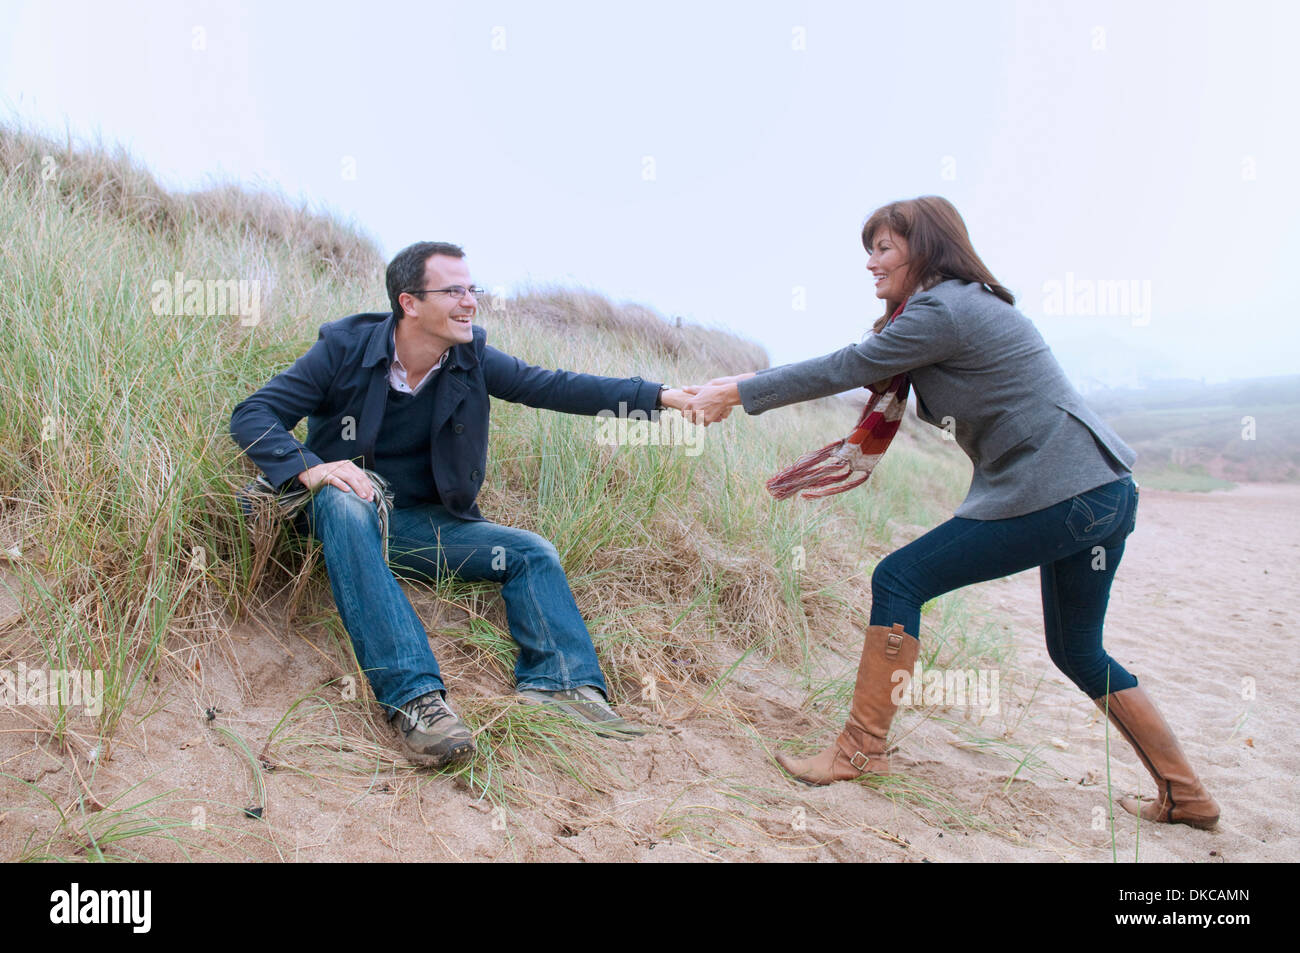 Couple getting up from sand dune Stock Photo